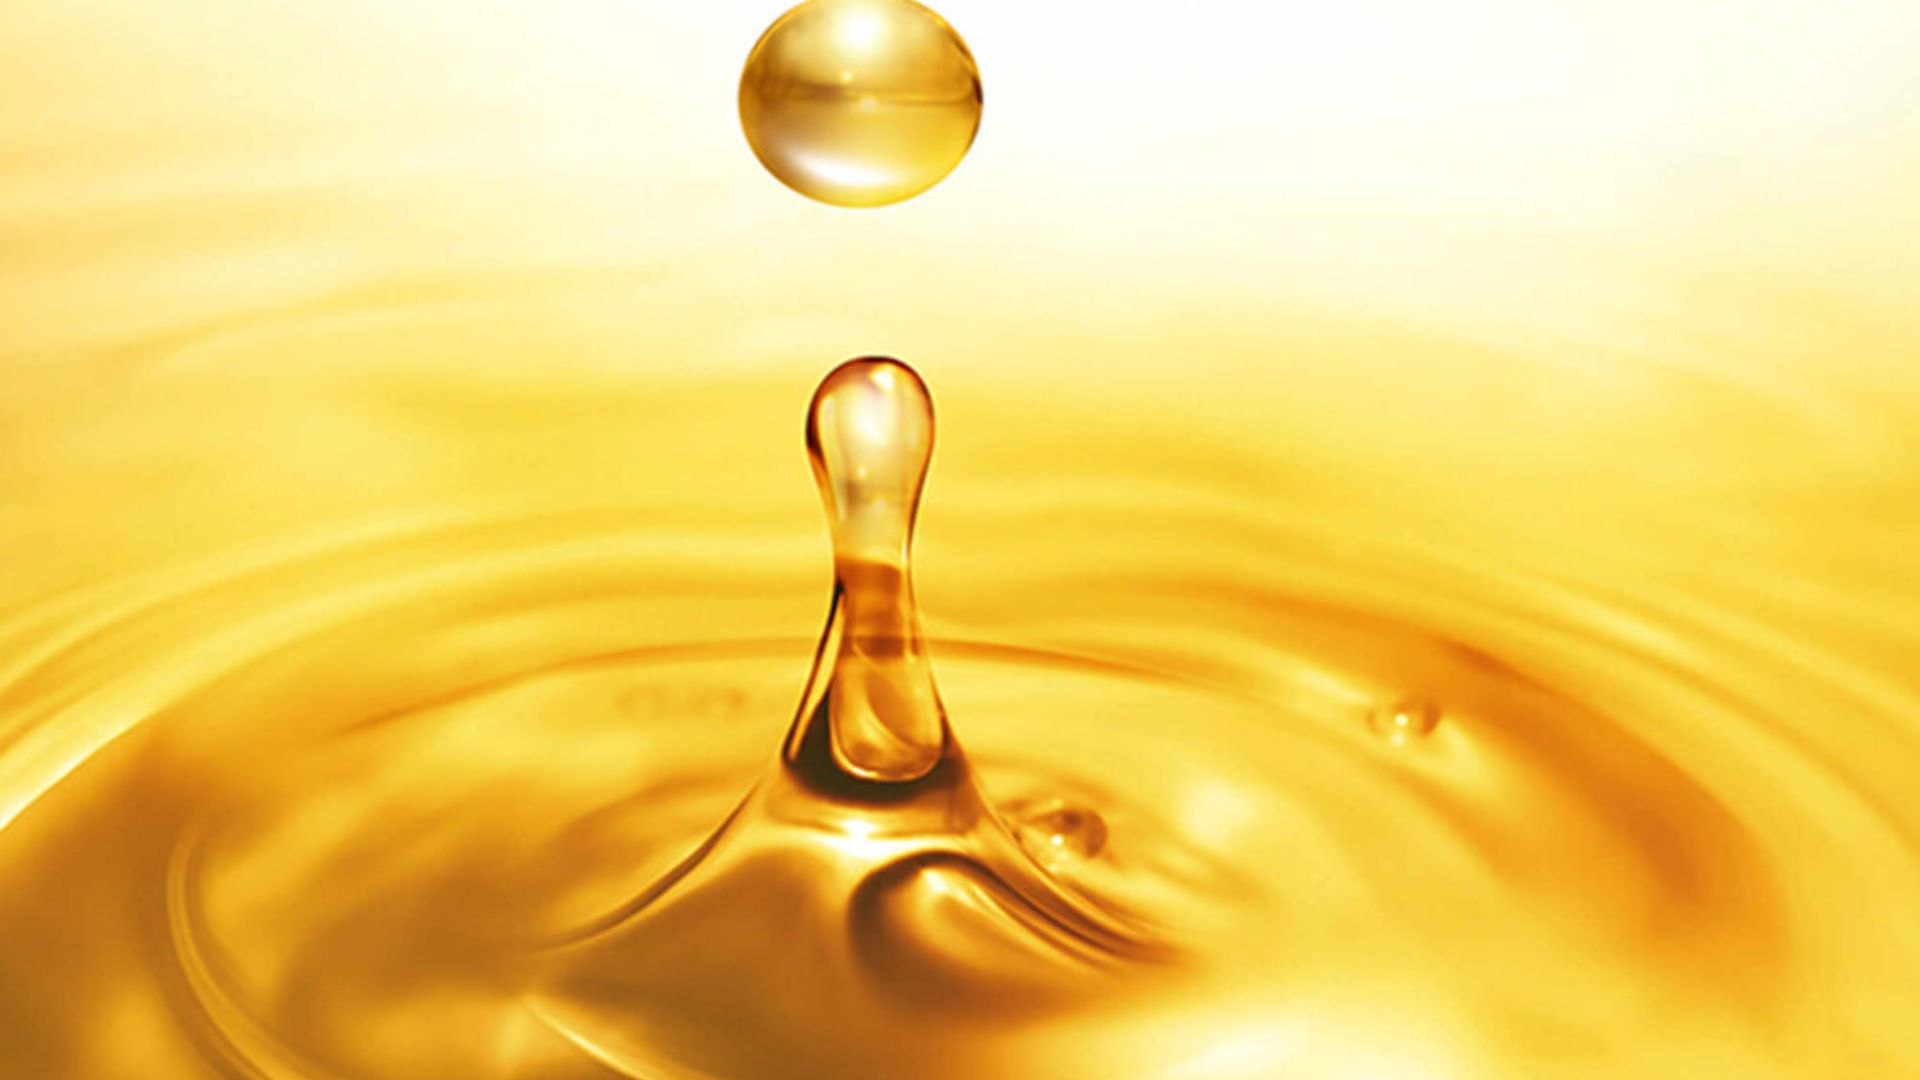 Oil Drops Creating Ripples